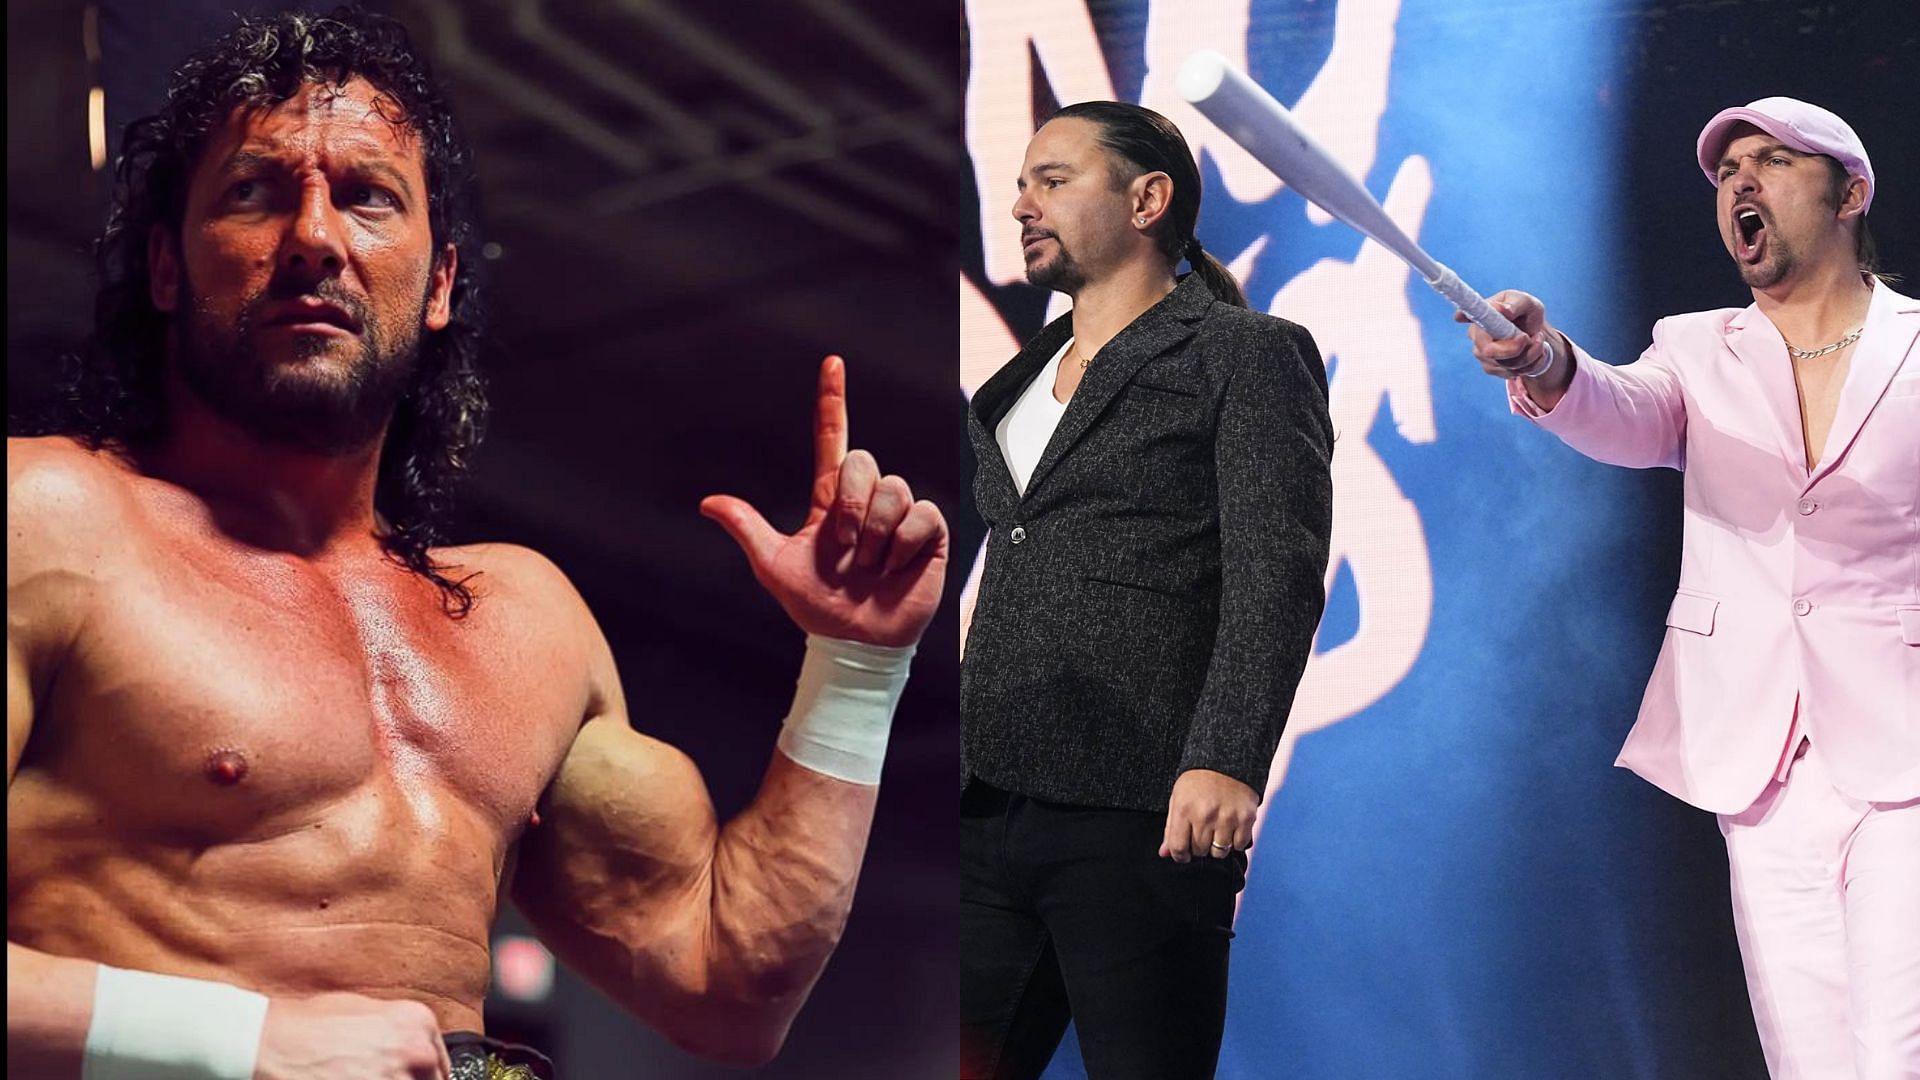 Kenny Omega and The Young Bucks used to form The Elite [Photos courtesy of AEW